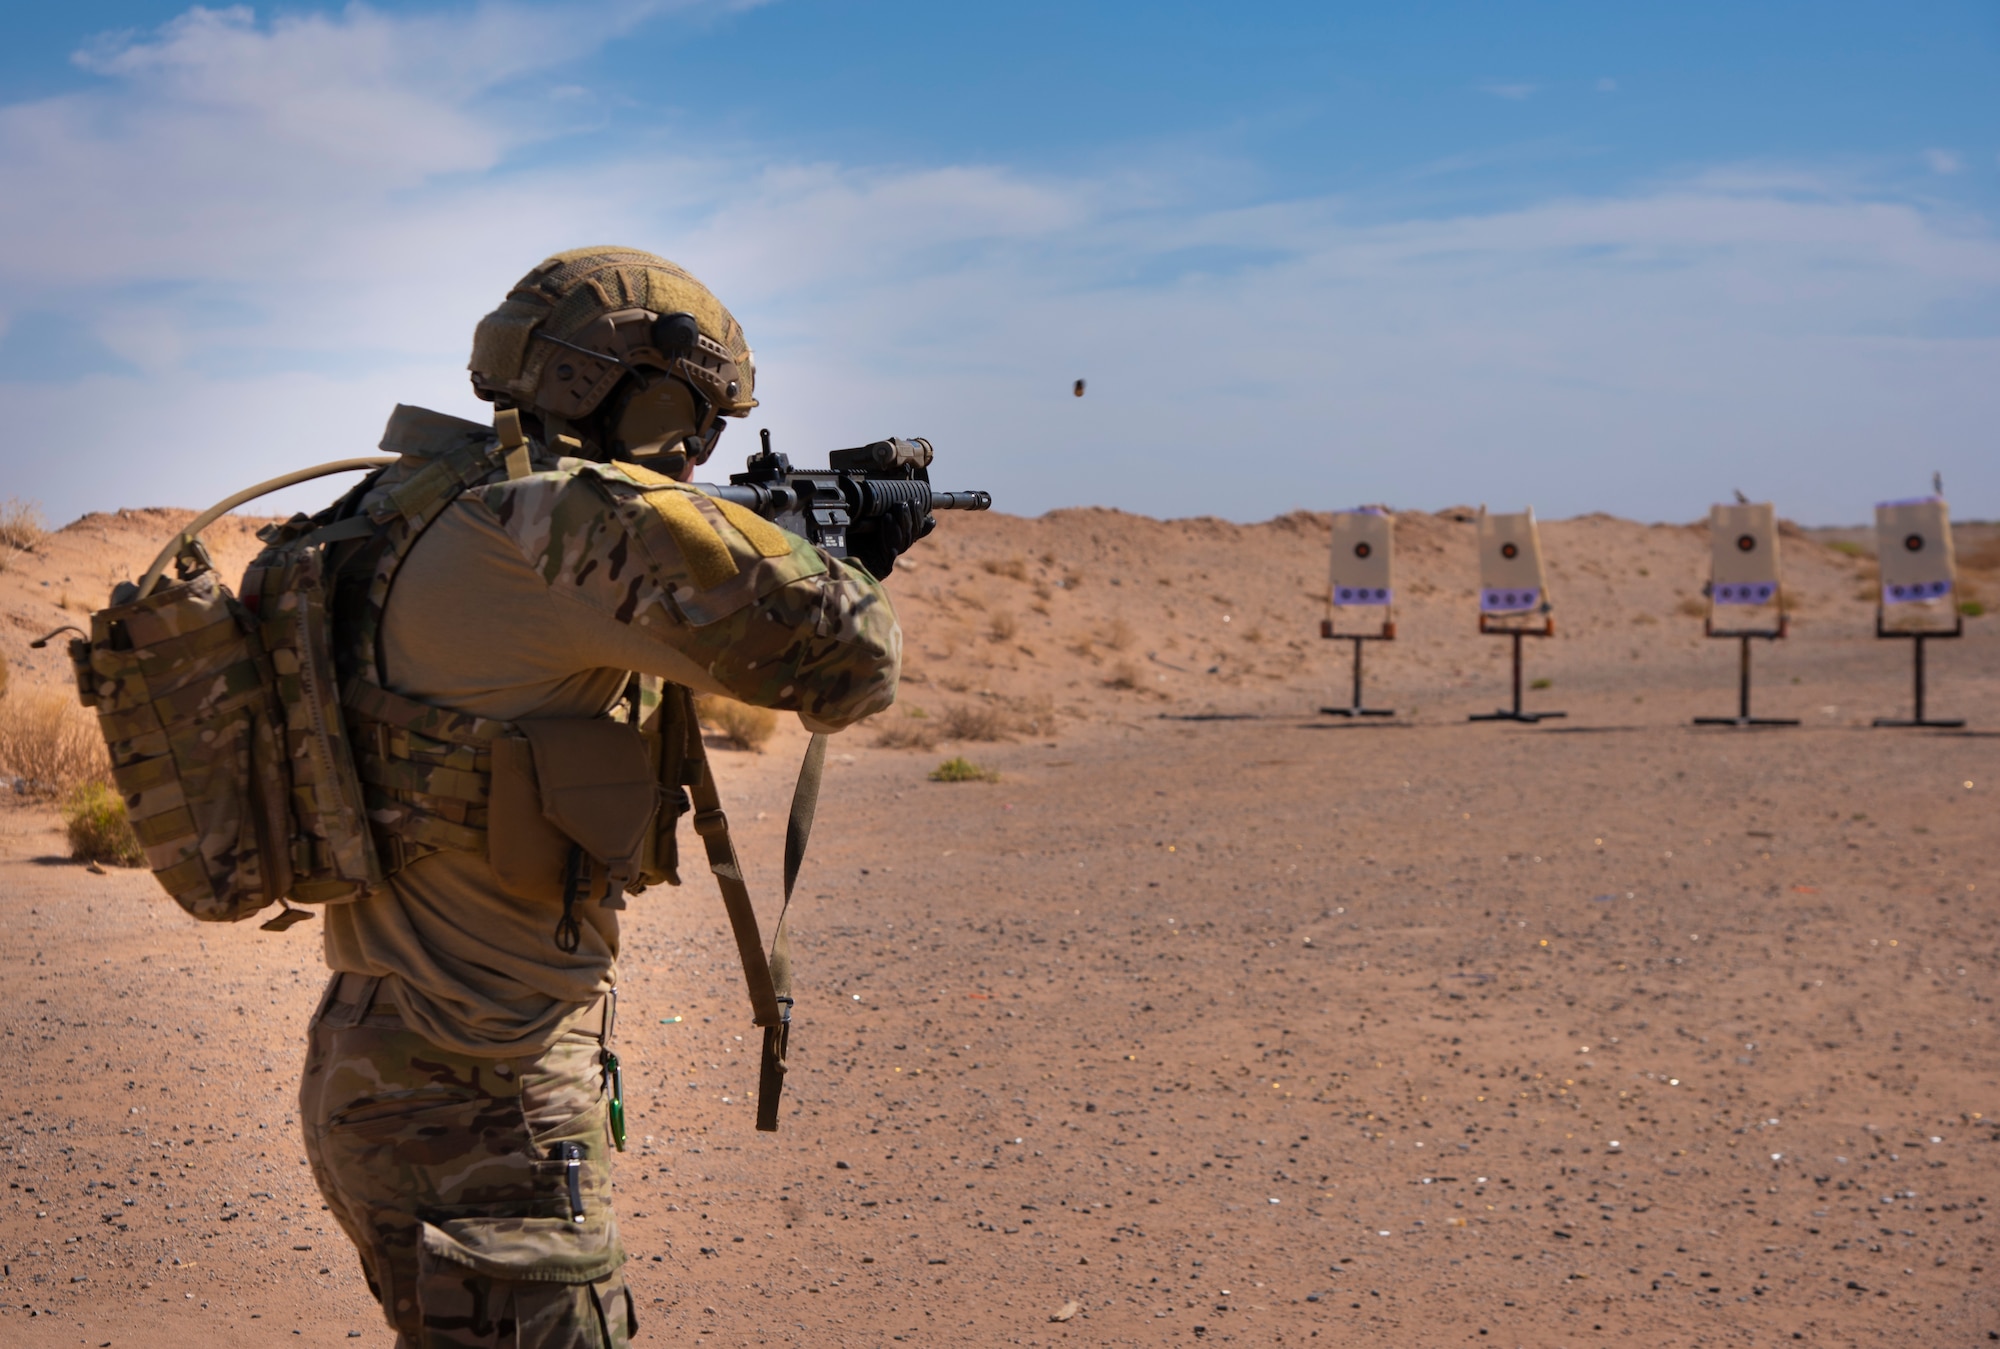 A U.S. Air Force Tactical Air Control Party specialist shoots an M-4 carbine at a target during the 2021 Wraith Challenge, April 21, 2021, on Fort Bliss Rod and Gun Club, Texas. The TACP specialists went through the Navy qualification course of fire, giving the competitors the opportunity to qualify for marksmanship on Navy regulations which will earn them Navy ribbons and medals. (U.S. Air Force photo by Airman 1st Class Jessica Sanchez)